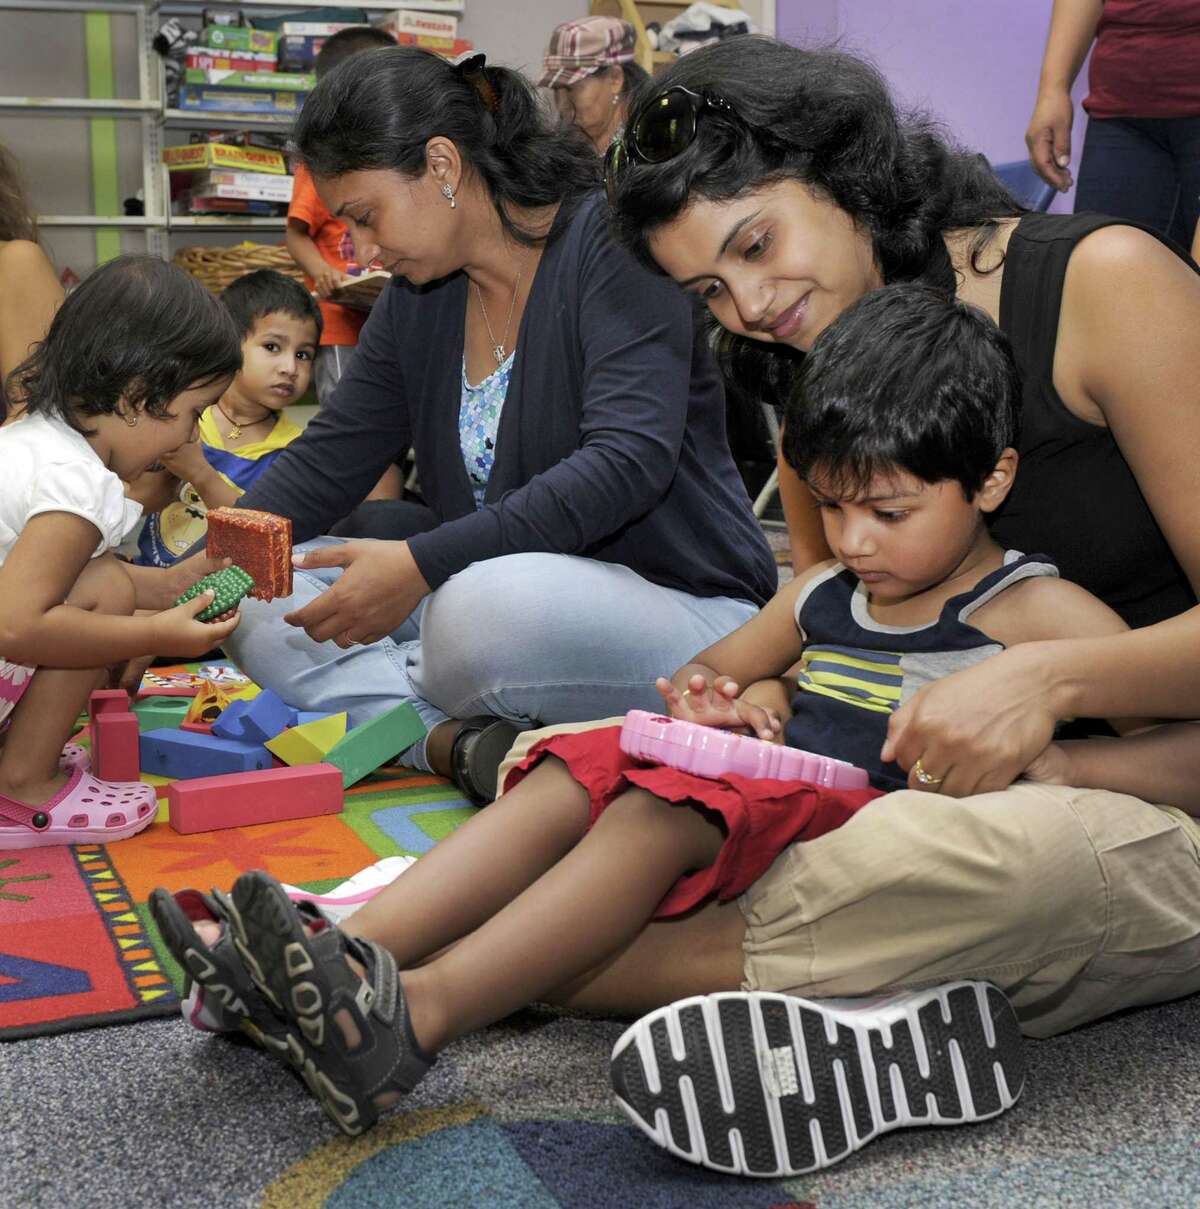 Lipsa Panda, right, and son Aaron Mohapatra, 3, play an electronic game during a weekly class offered by The United Way of Western Connecticut, Wednesday, June 10. Left is Kavita Desai and daughter Aashi, 2 1/2. The class, held at the Danbury Library, is a pilot program for the largely-Latino neighborhood around the Park Avenue Elementary School to teach parents how to be the primary educators of their children.